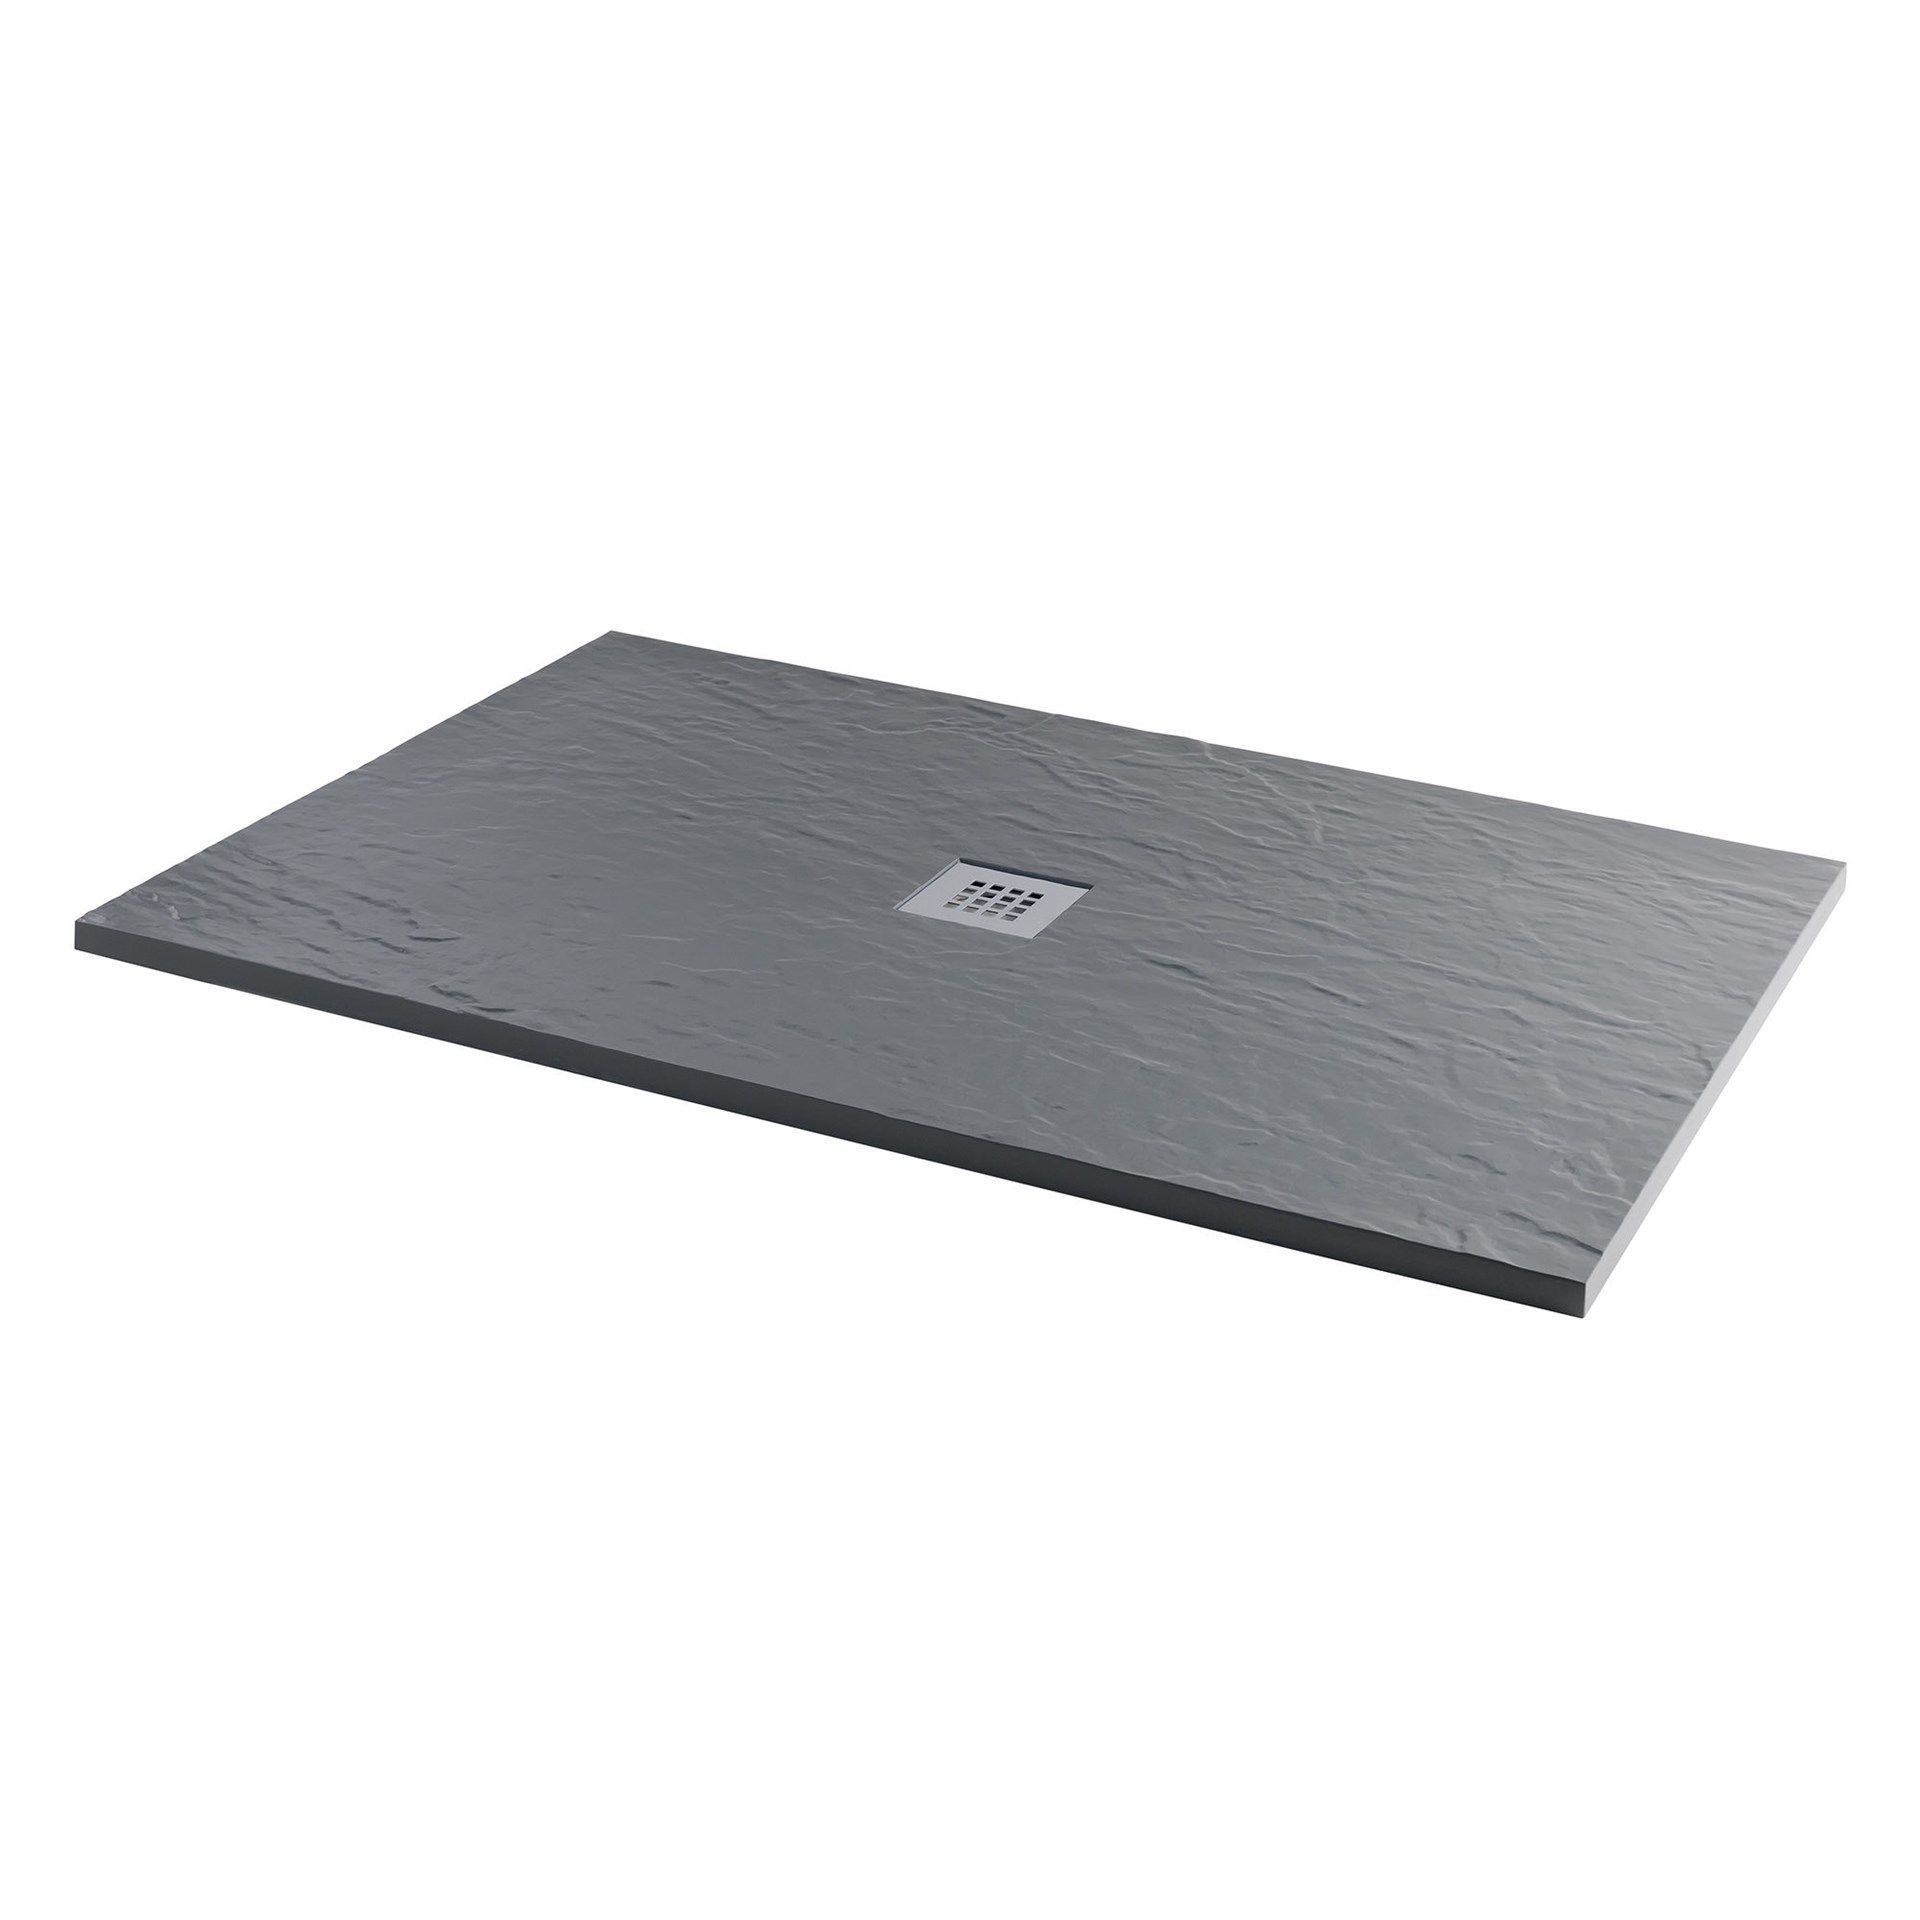 BRAND NEW 1200x800mm Rectangular Slate Effect Shower Tray in Grey. Manufactured in the UK from - Image 2 of 2